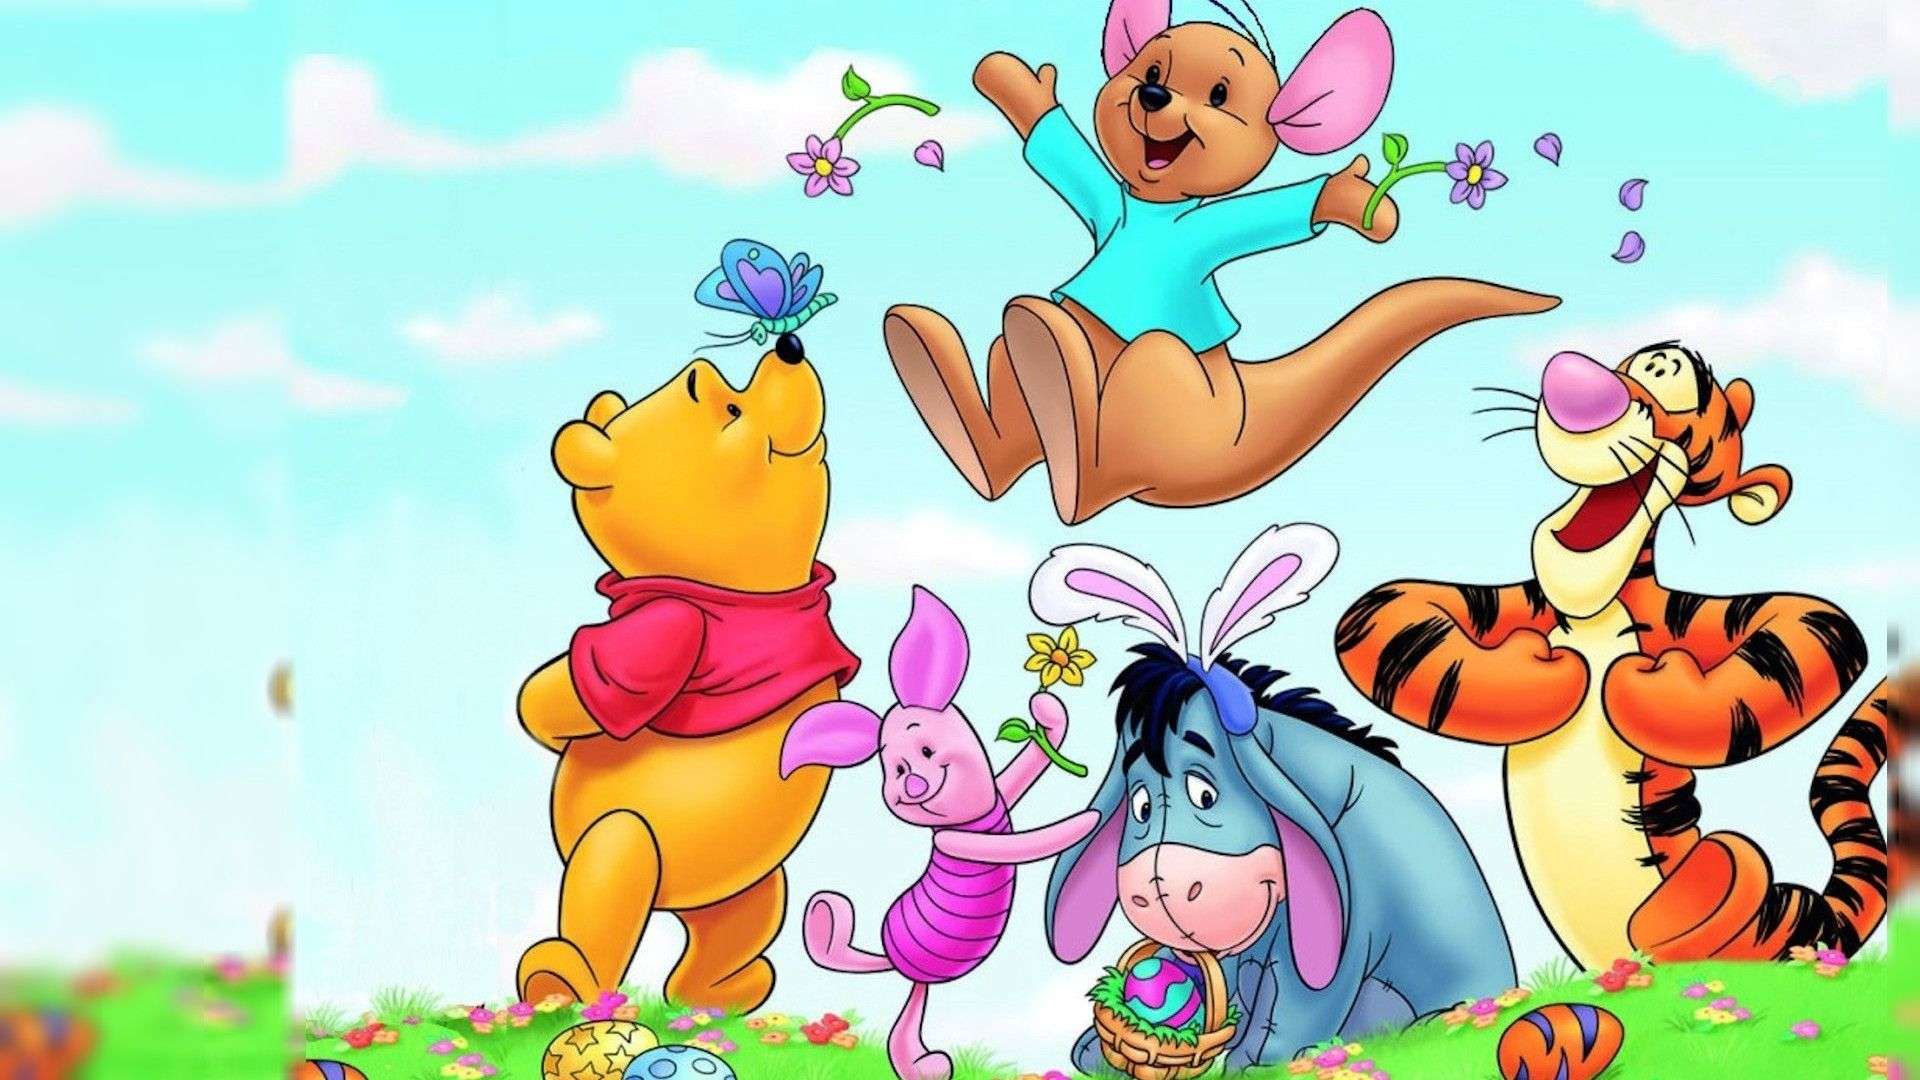 Winnie The Pooh Wallpaper HD Best Collection For Desktop